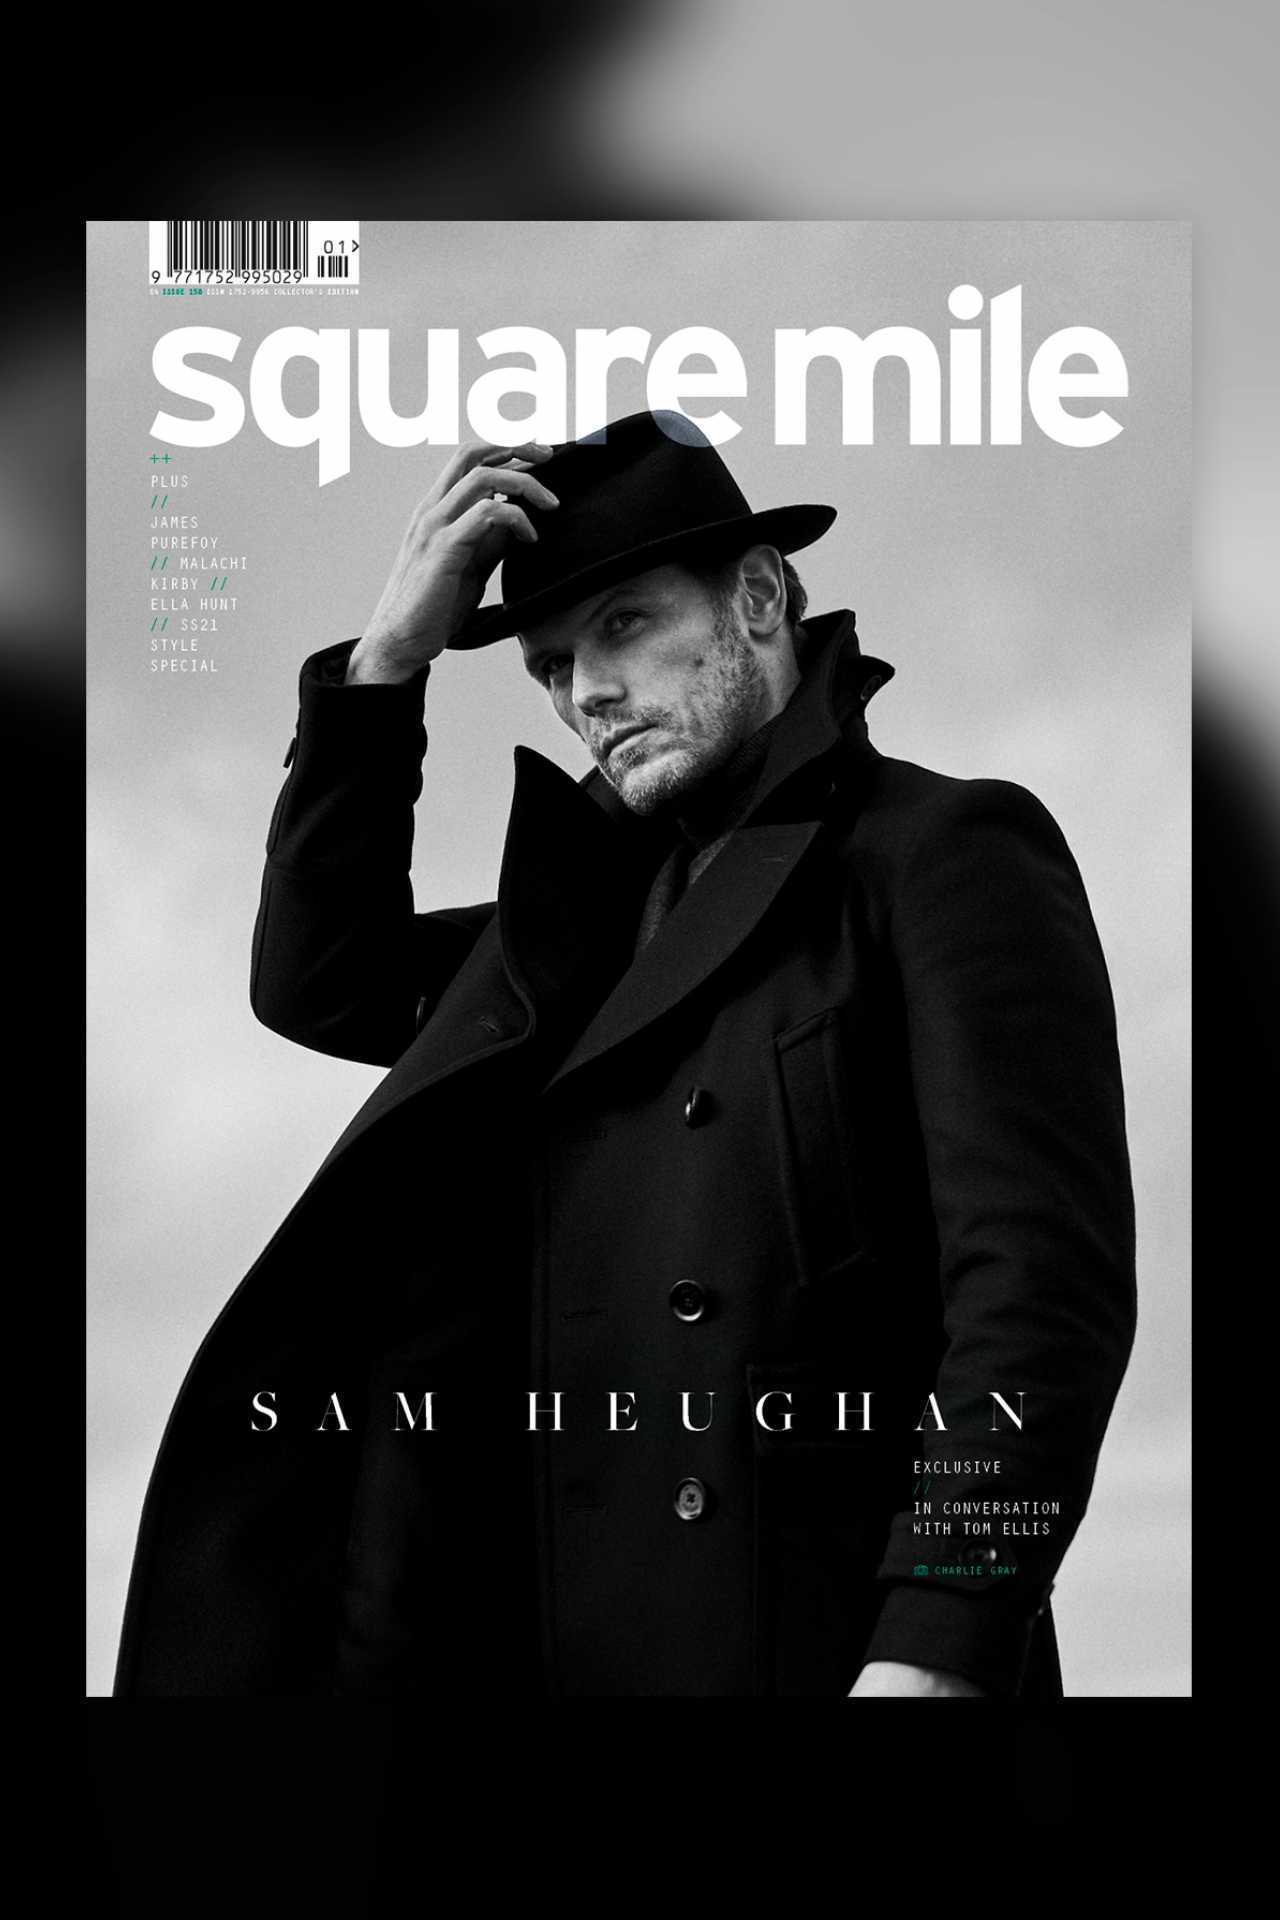 Sam Heughan photographed by Charlie Gray for Square Mile magazine